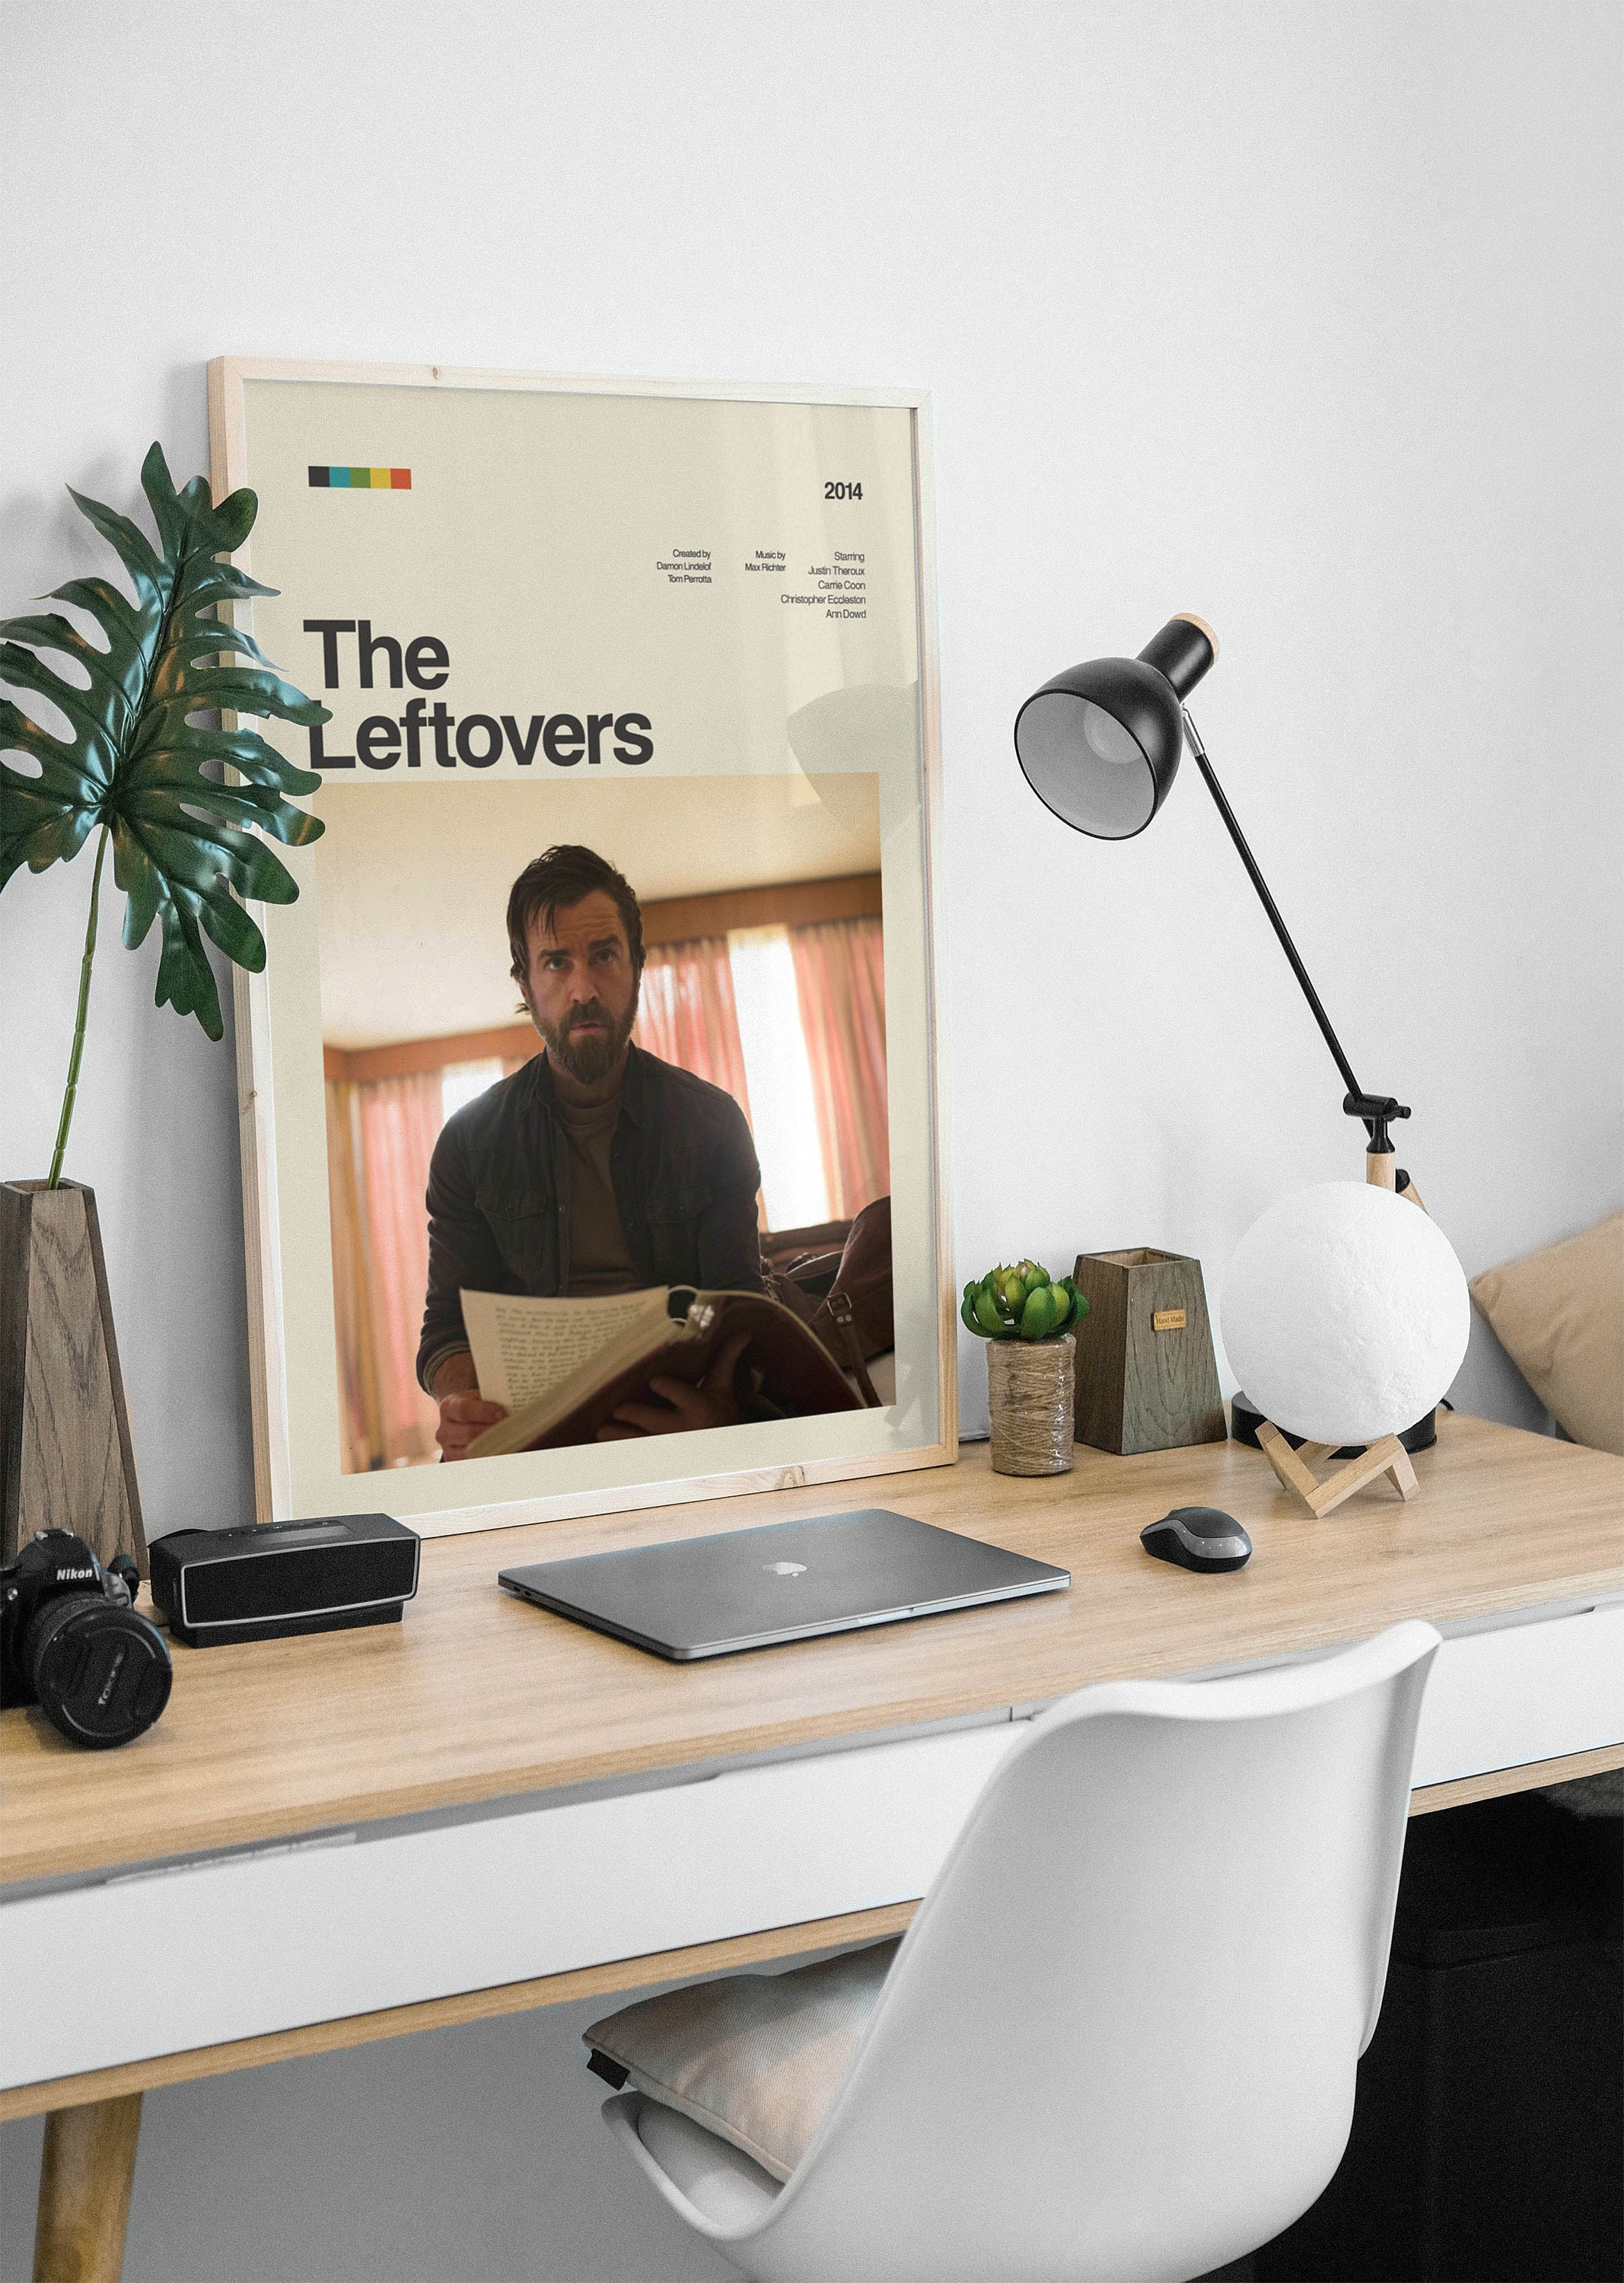 The Leftovers Poster Print No:2, Tv Show Poster